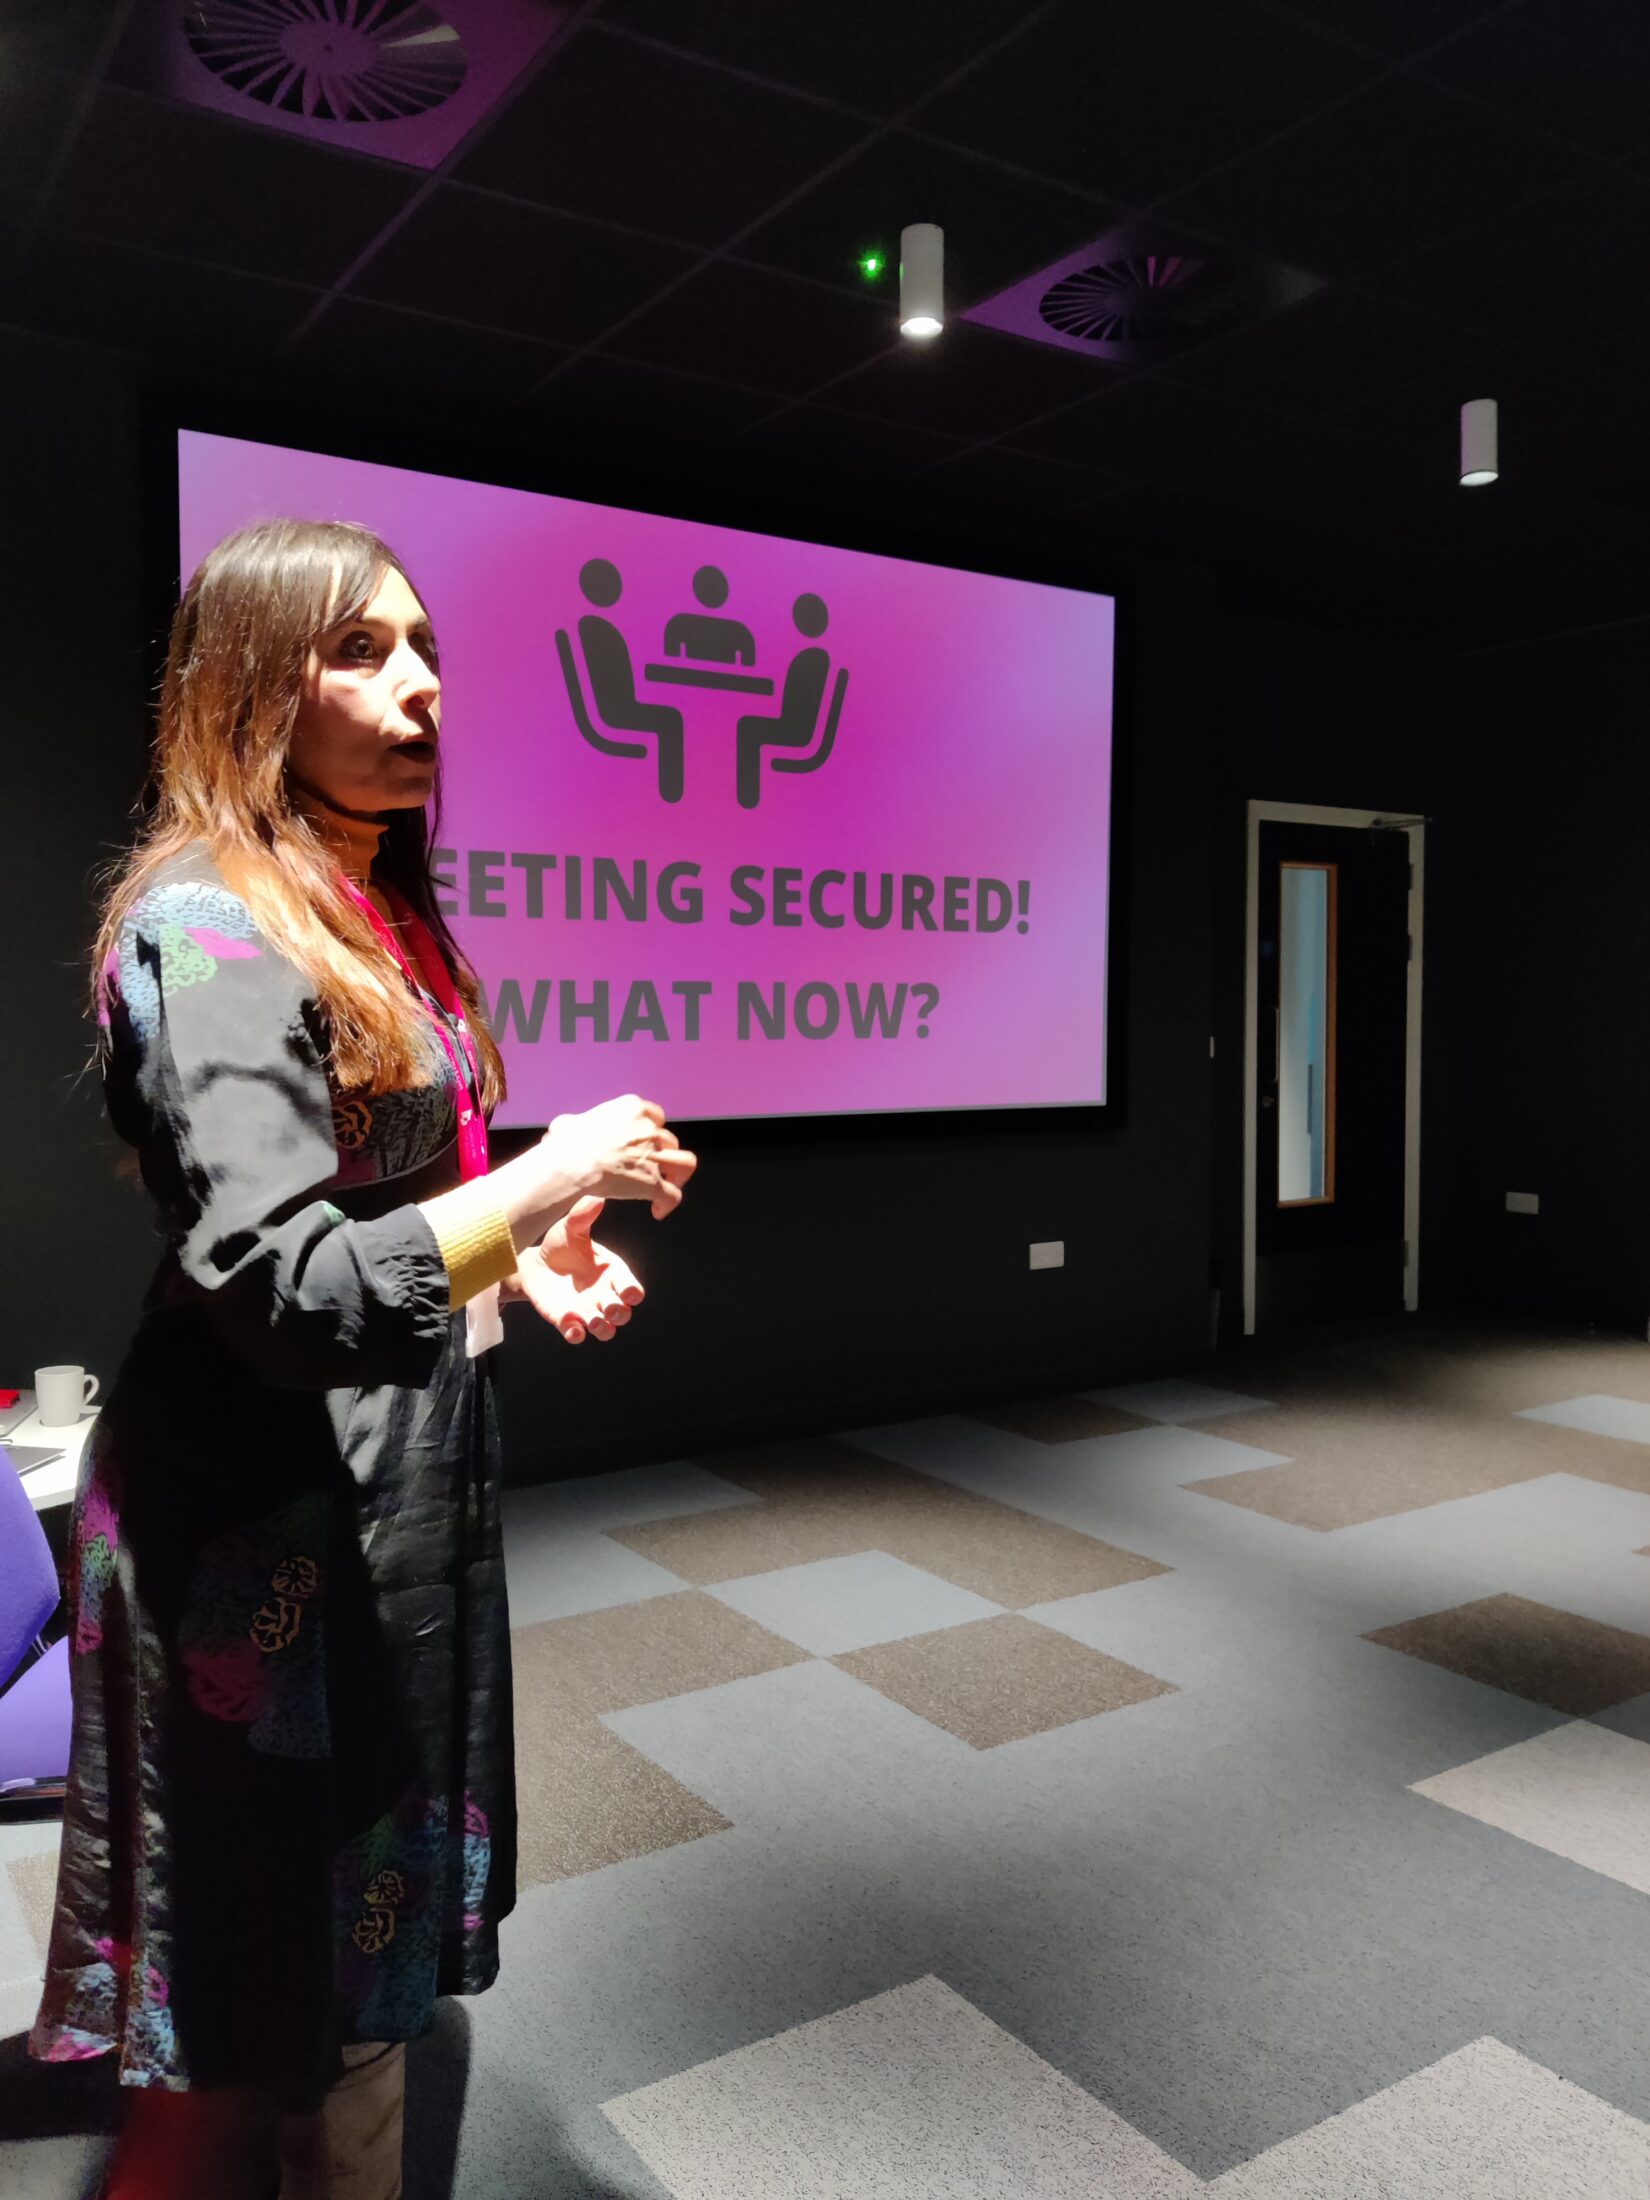 Flapjack festival - Woman stands up in front of a screen with a pink background, with a small diagram showing seated people, and text which reads: "Meeting Secured What Now?"